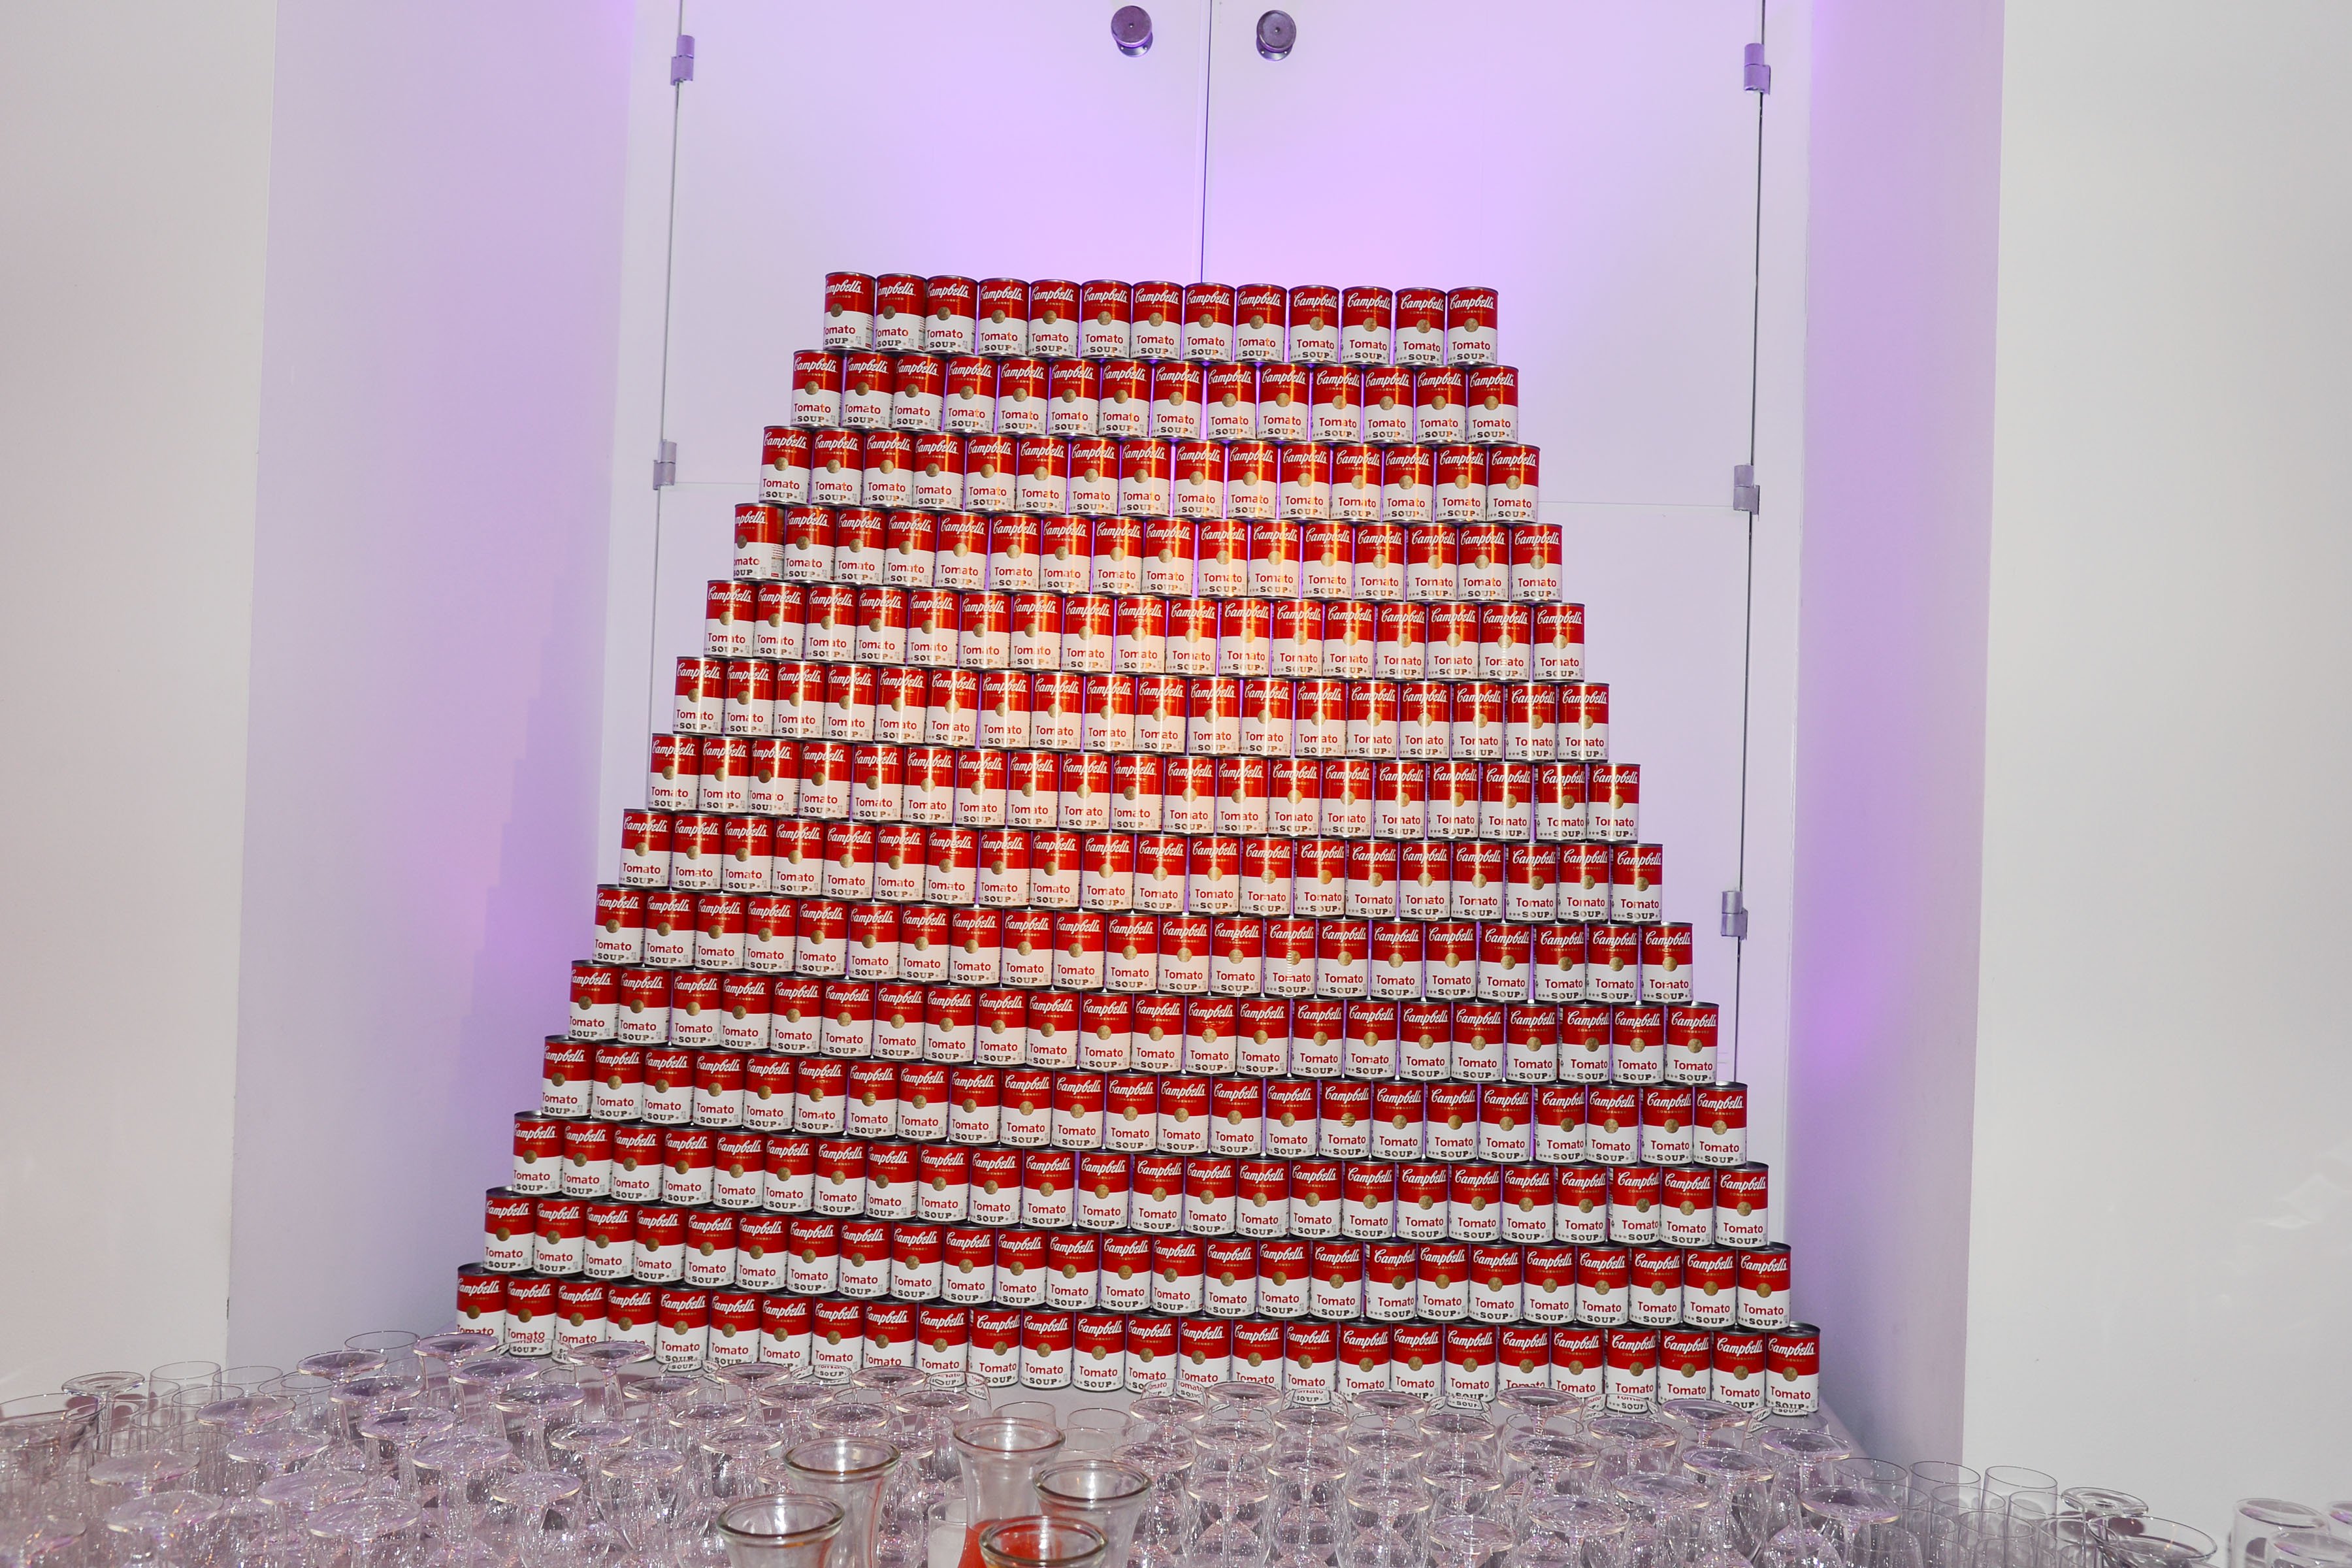 A tribute to Warhol's famous Campbell's soup cans